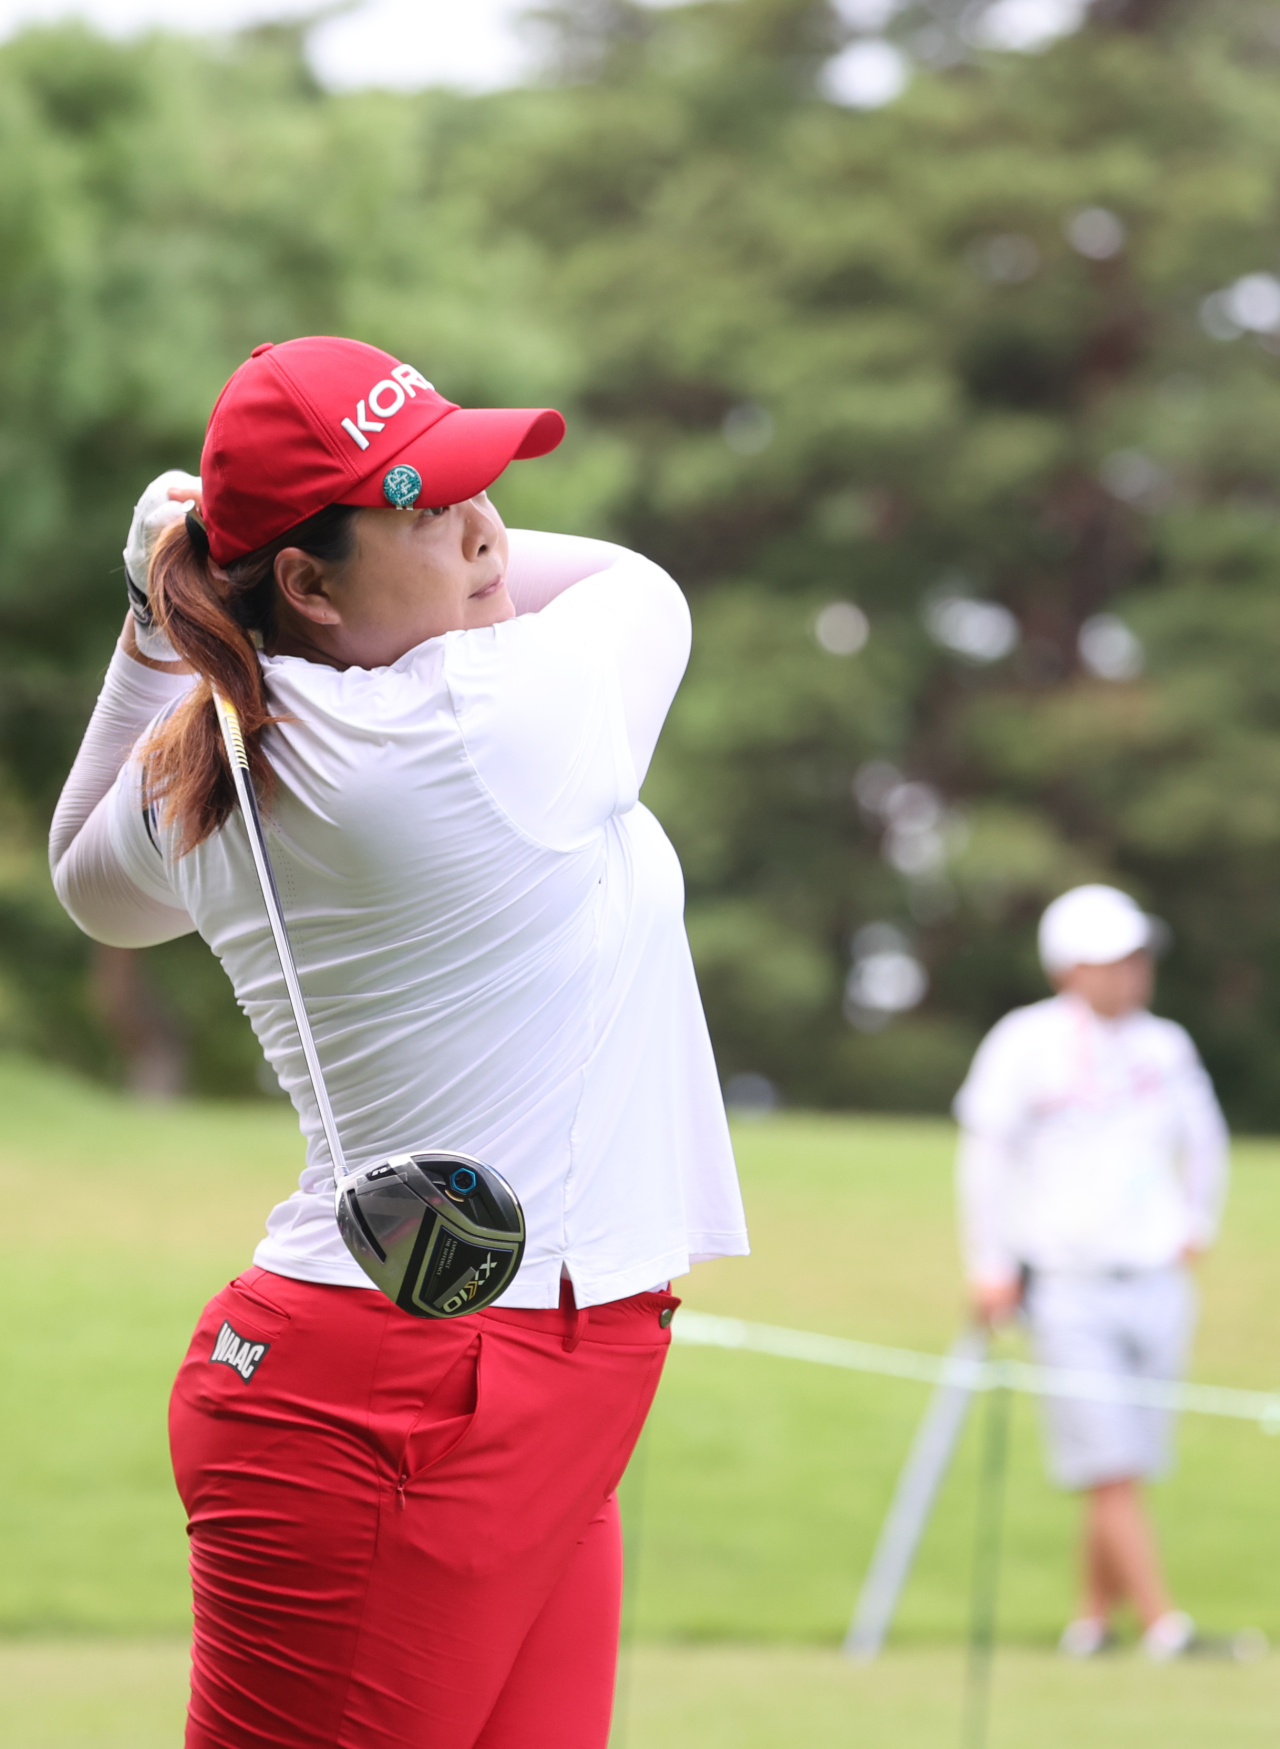 n this file photo, Park In-bee of South Korea hits a tee shot on the 14th hole during the final round of the Tokyo Olympic women's golf tournament at Kasumigaseki Country Club in Saitama, Japan, on Aug. 7, 2021. (Yonhap)